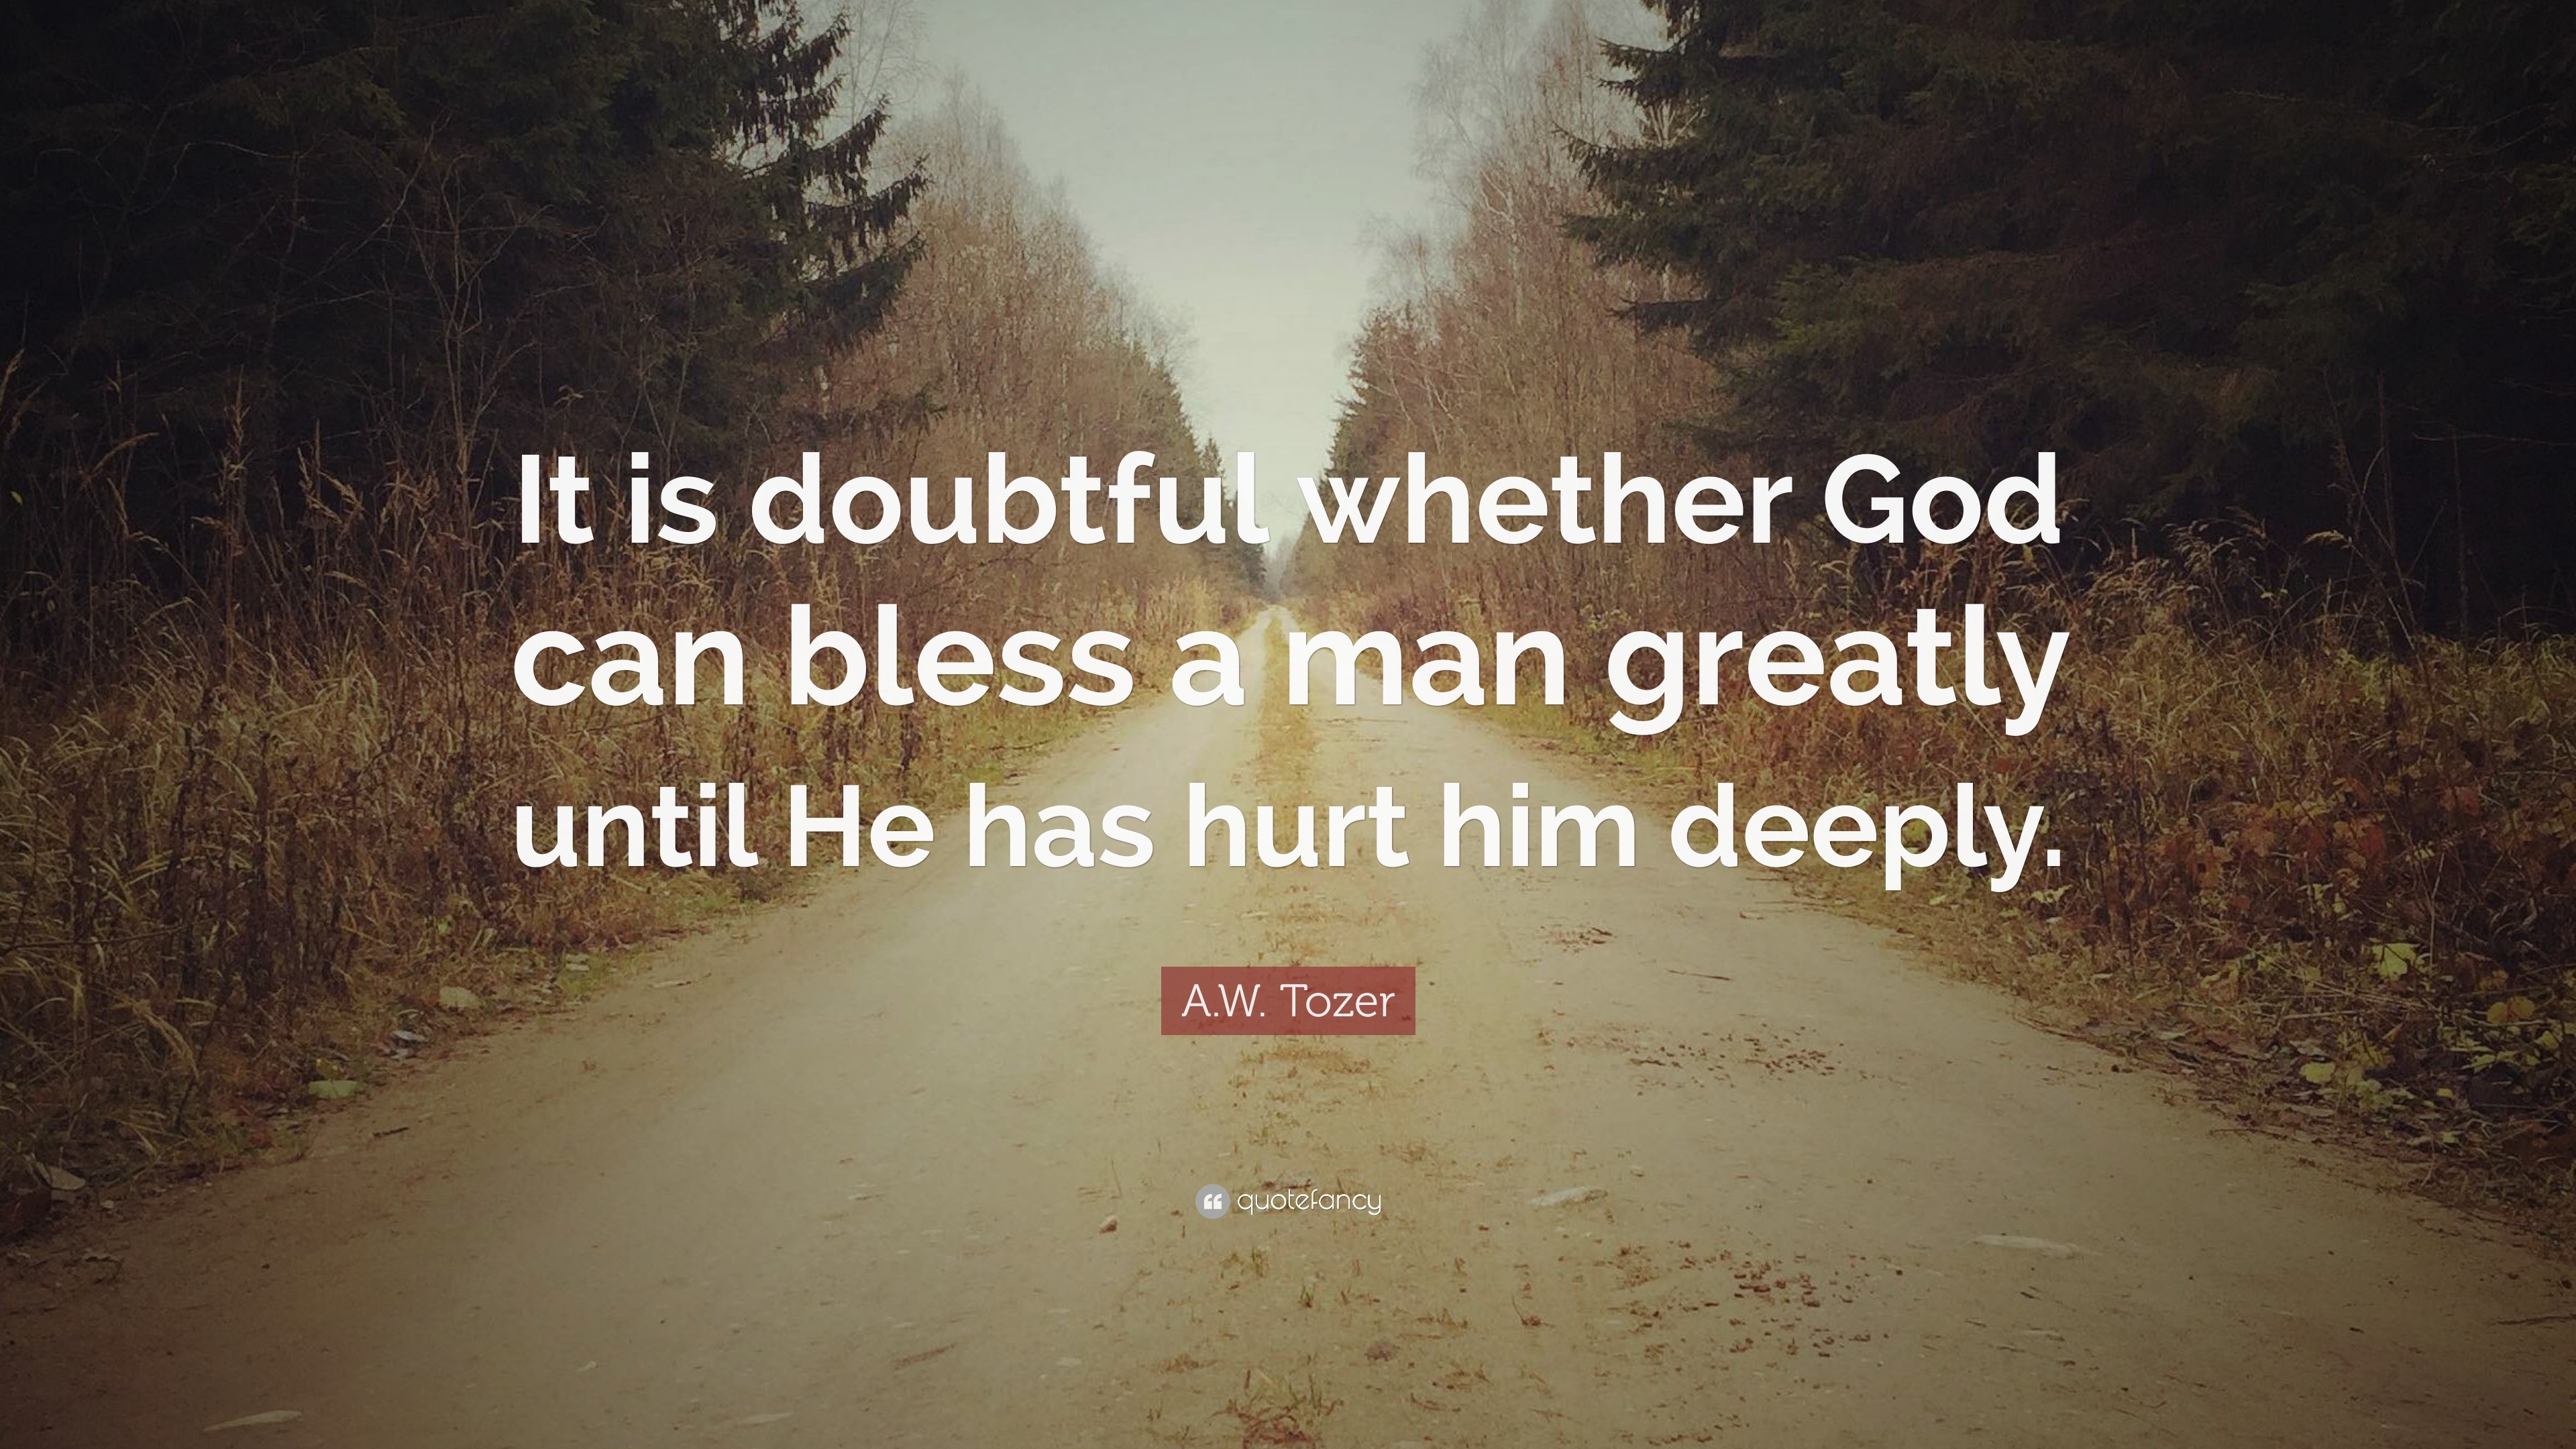 363323-A-W-Tozer-Quote-It-is-doubtful-whether-God-can-bless-a-man-greatly.jpg